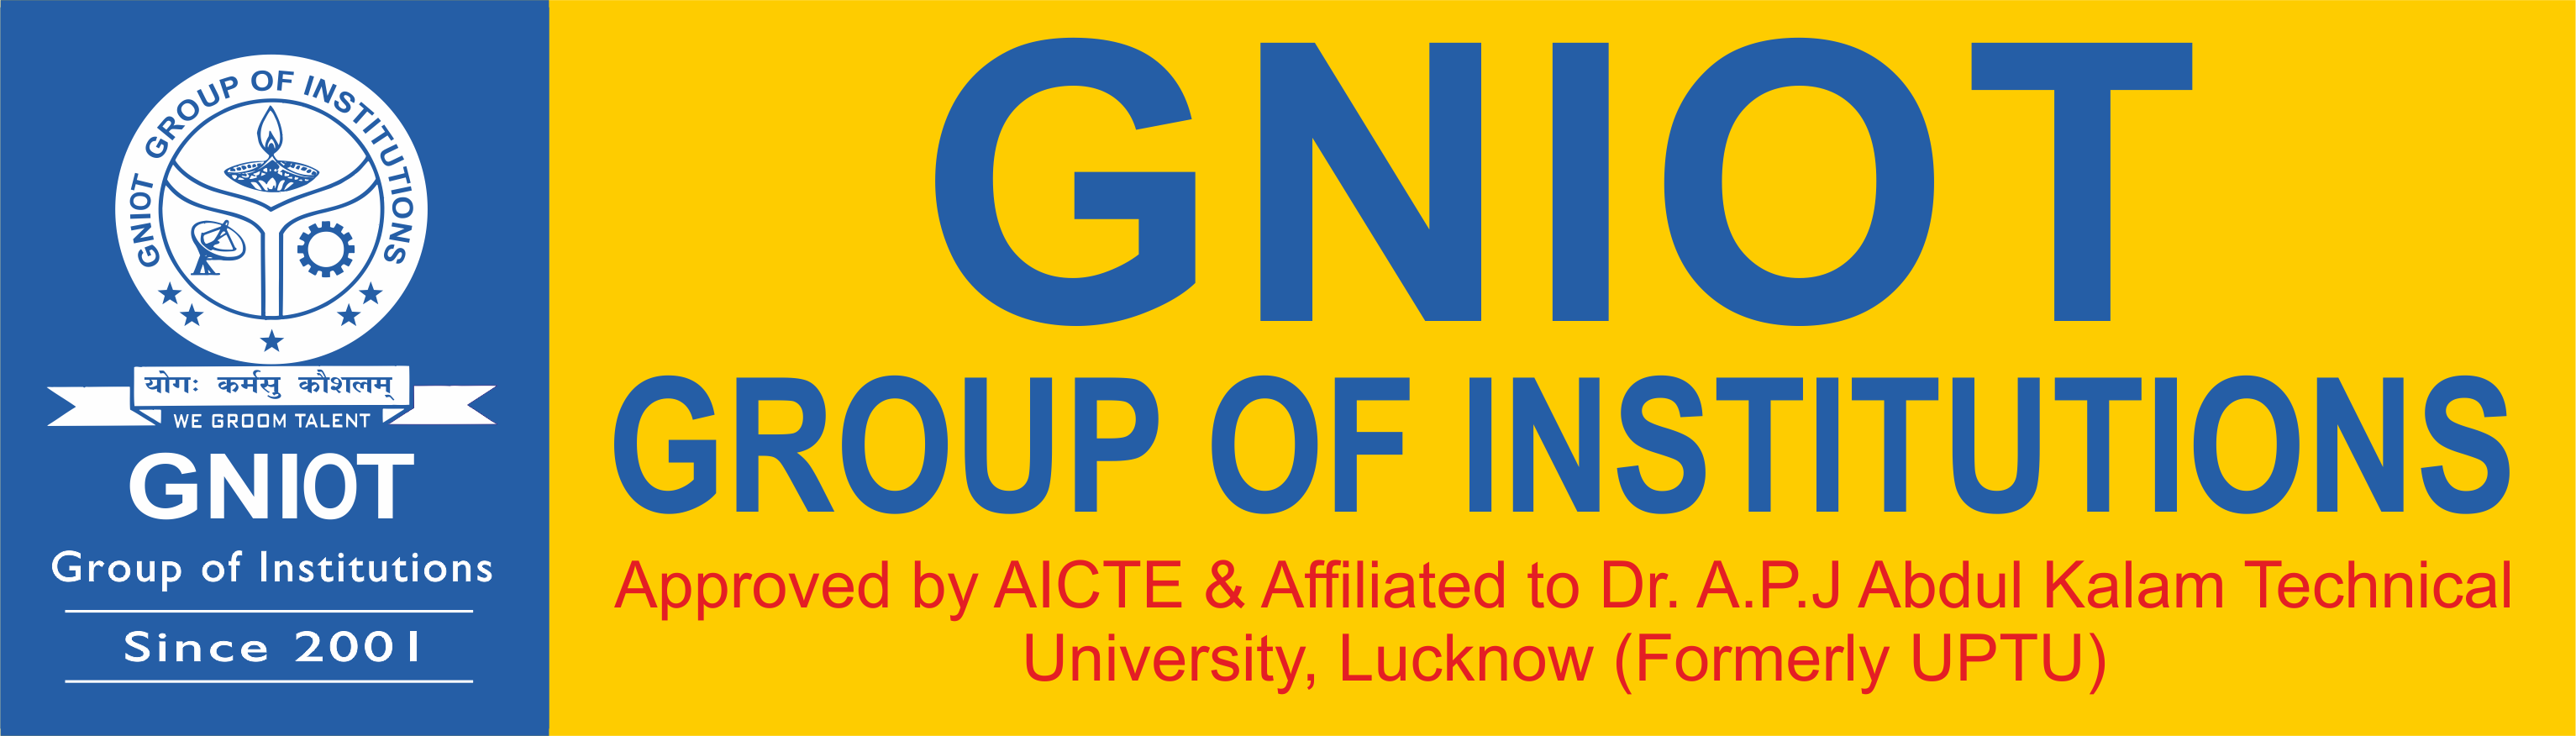 Greater Noida Institute Of Technology (GNIOT)